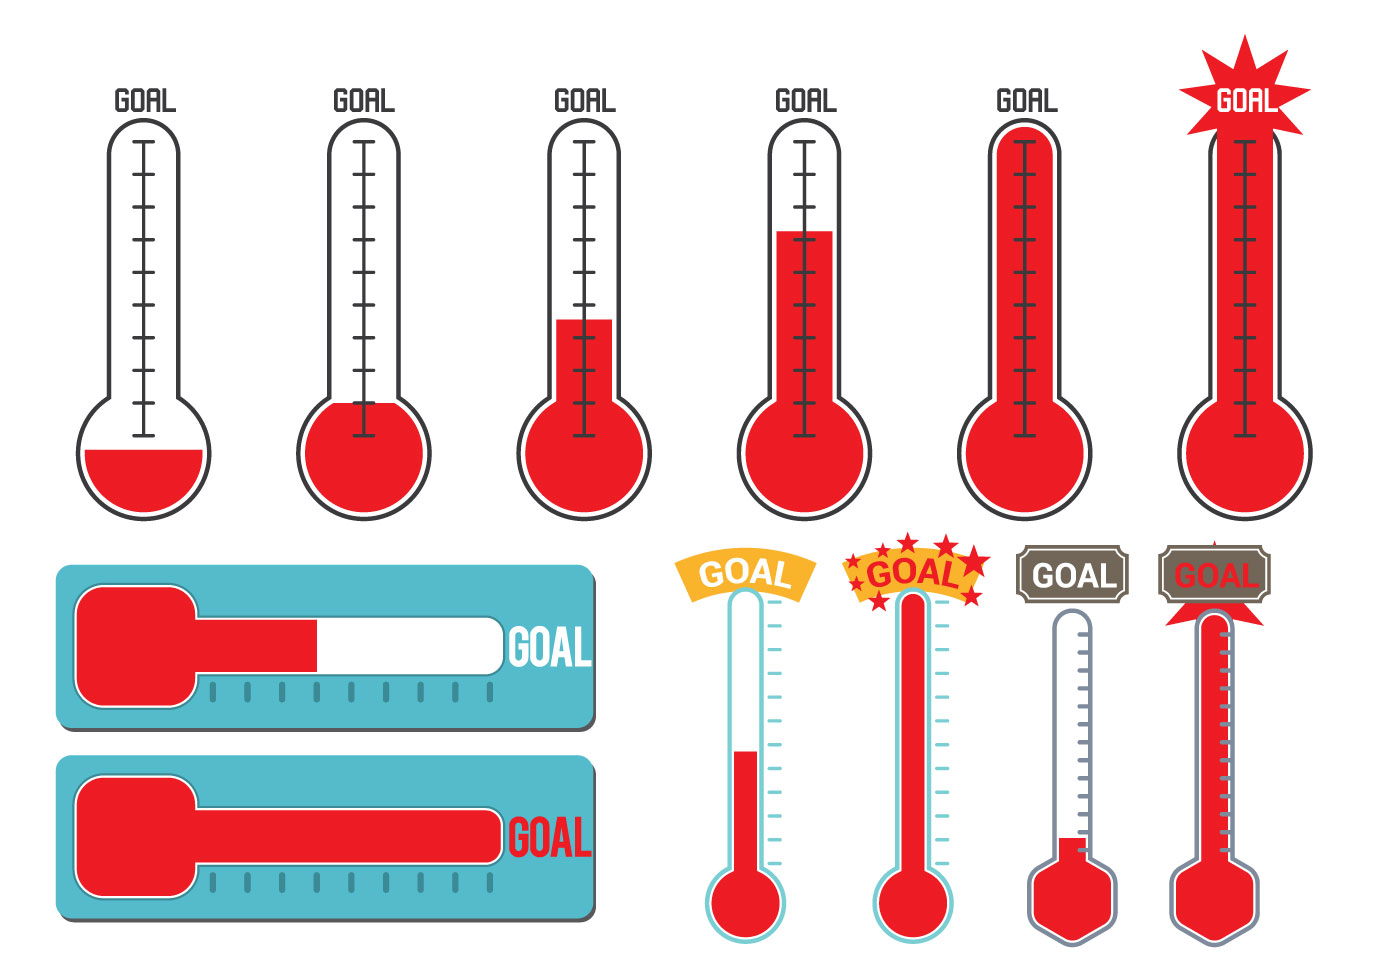 Goal Thermometer Vector - Download Free Vector Art, Stock Graphics ...